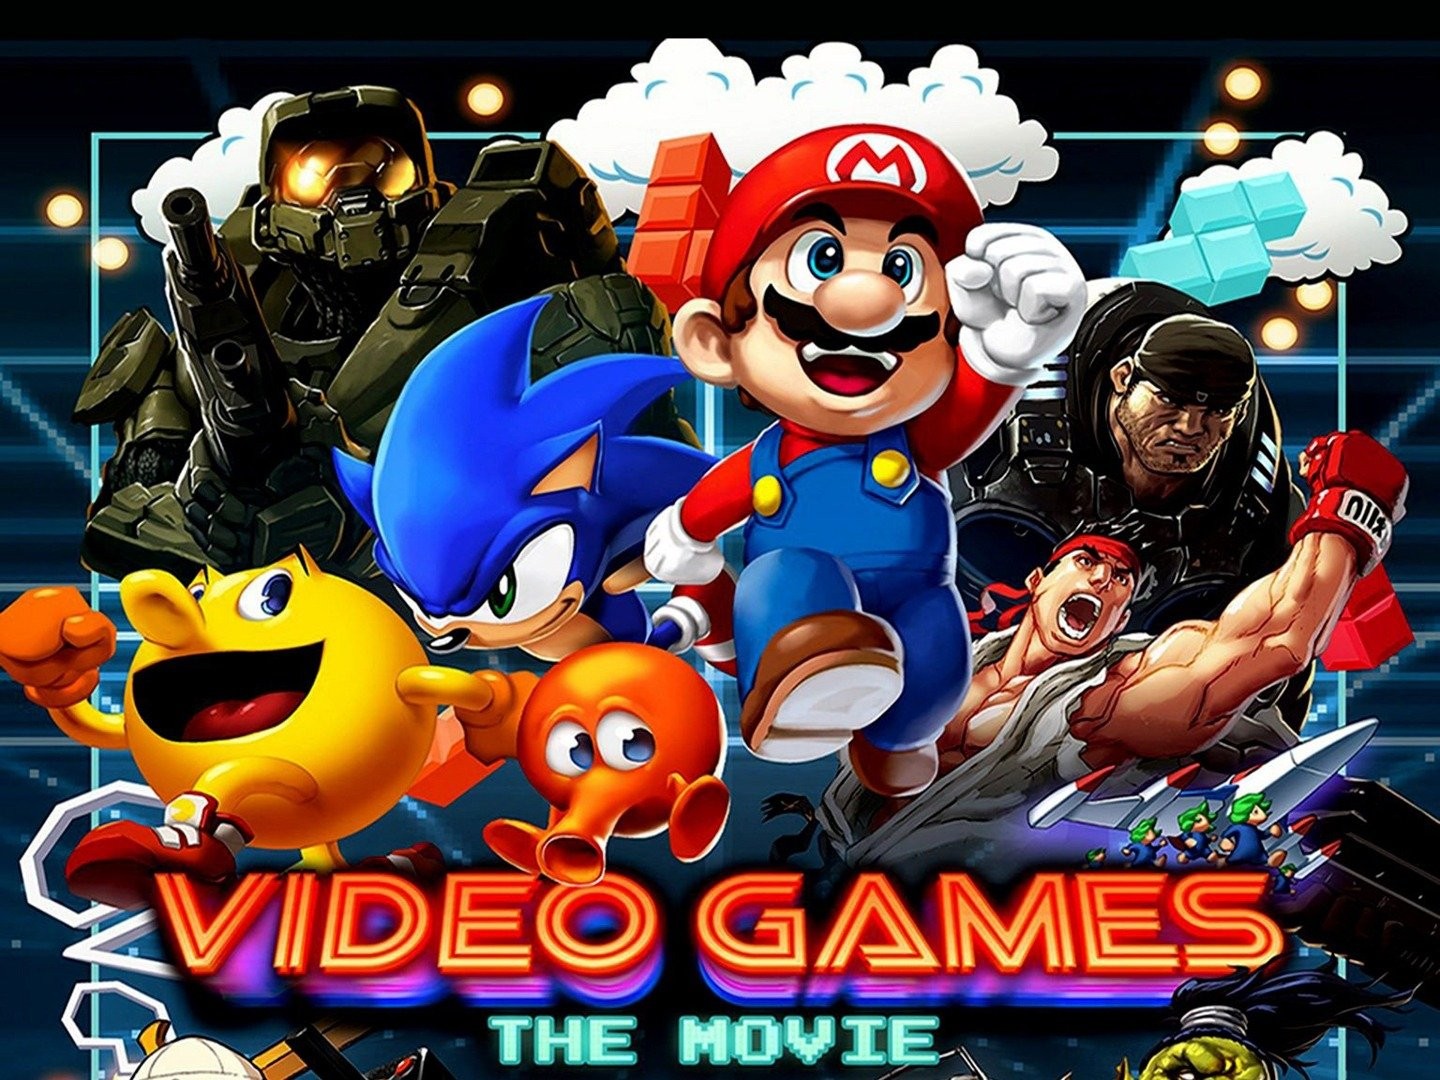 Video Games: The Movie 